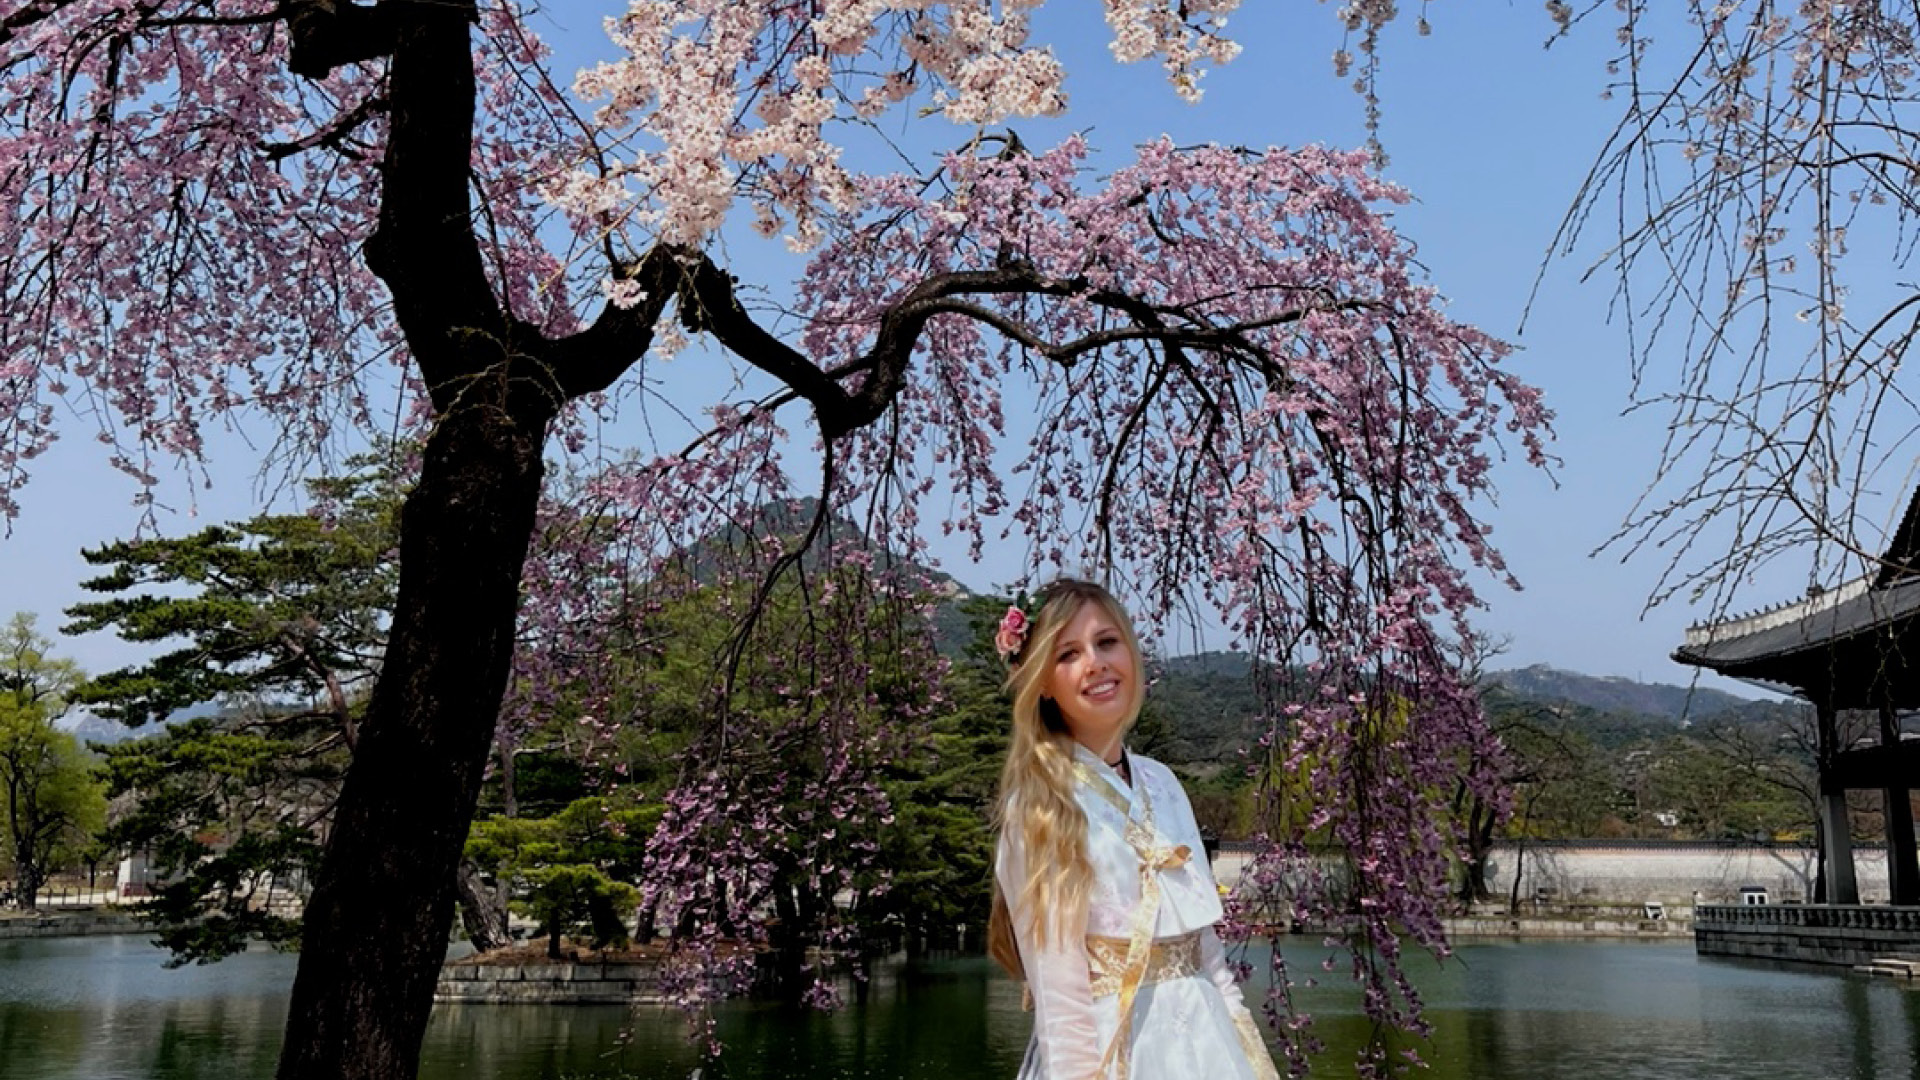 MCiT Bachelor student Elena Wehinger completed her mandatory internship in East Asia, in South Korea. 